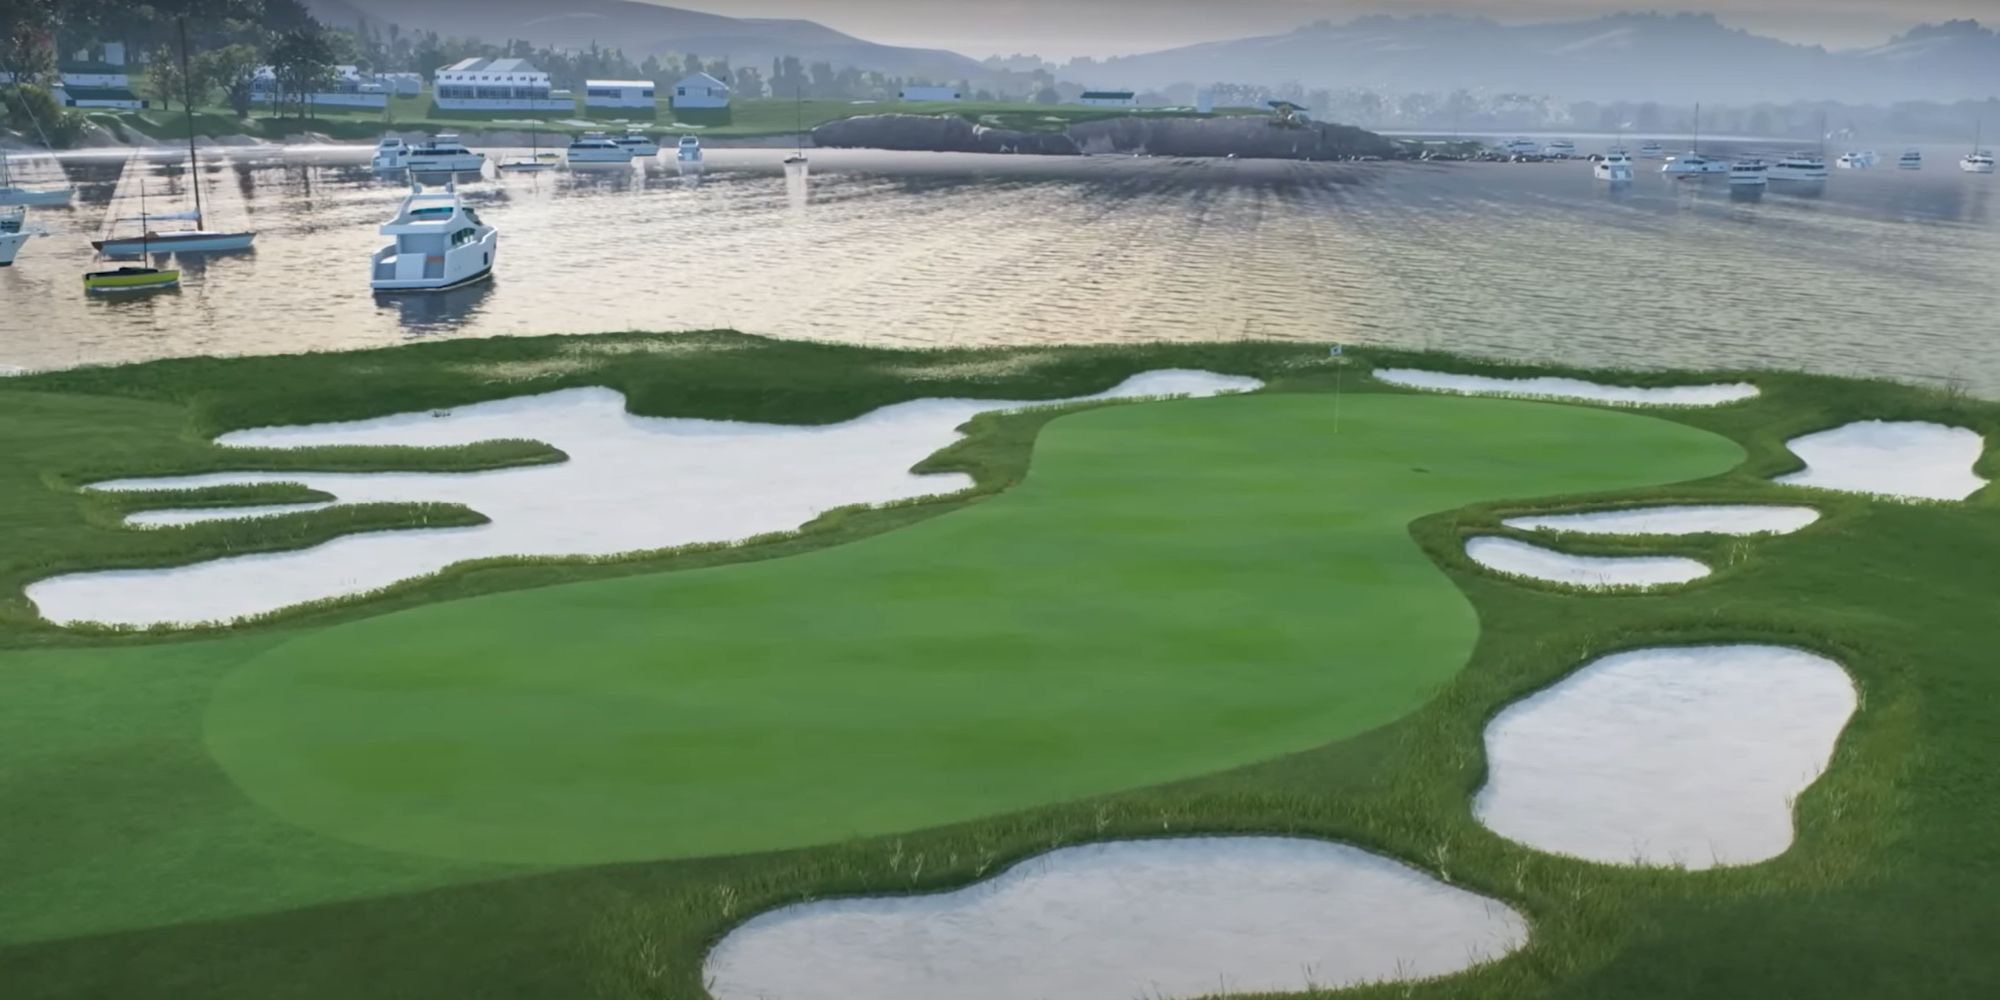 The iconic hourglass-shaped green at hole 17 of Pebble Beach in EA Sports PGA Tour